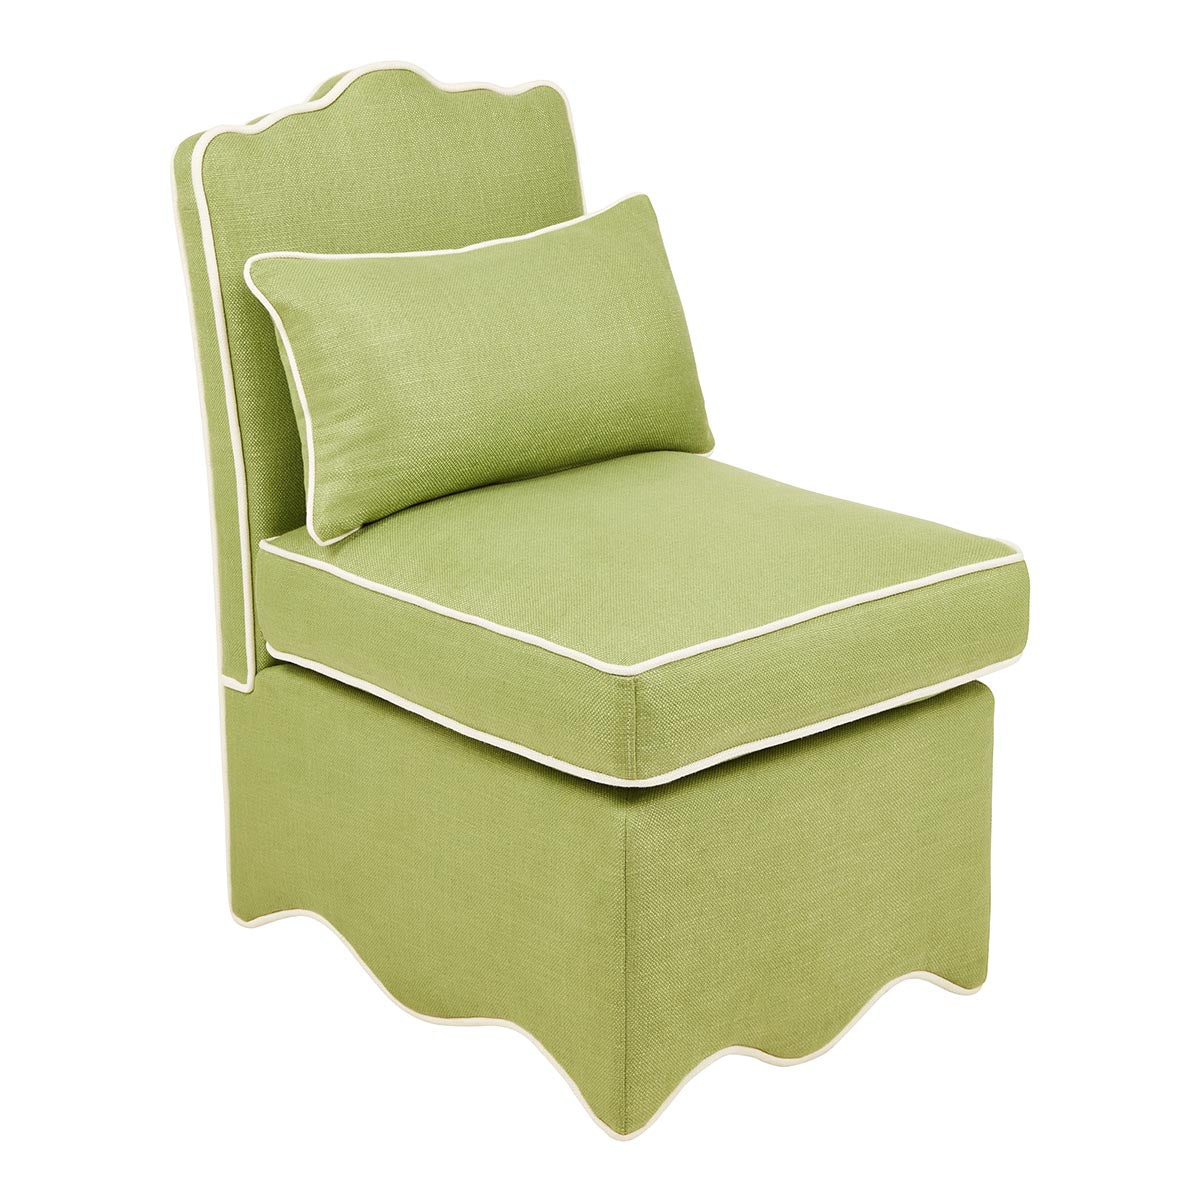 Scallop Upholstered Slipper chair